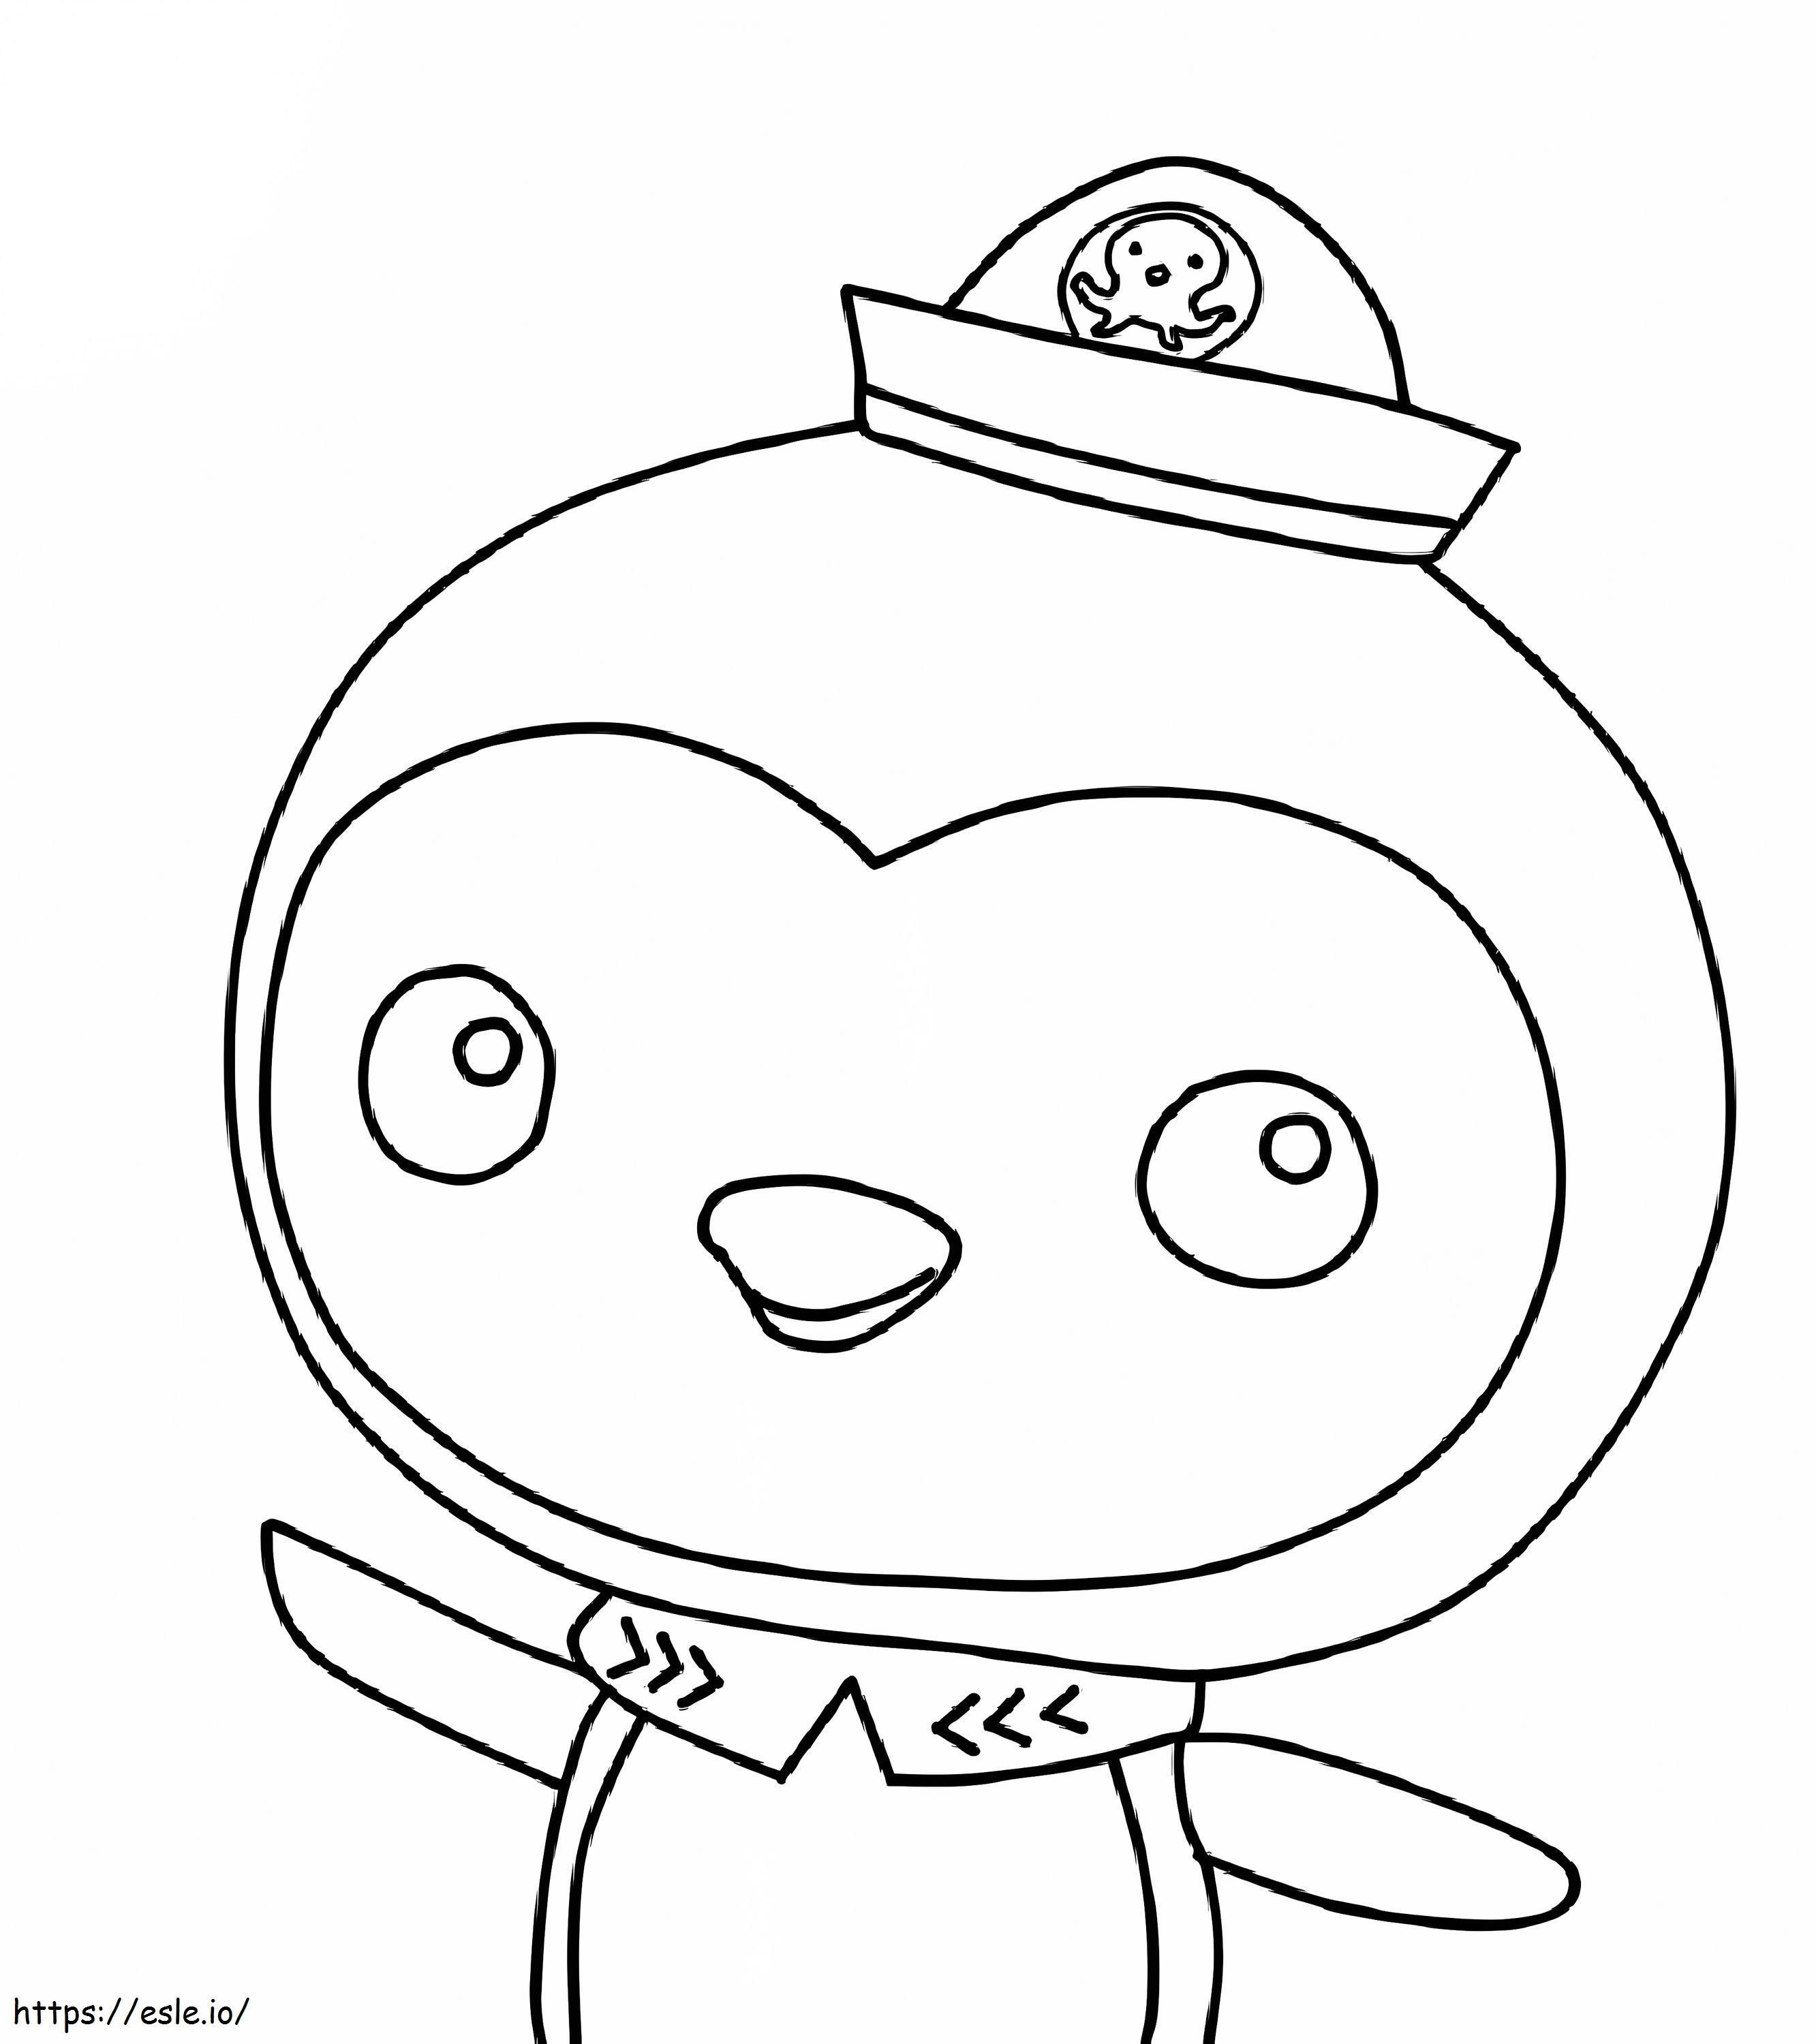 Weight Octonauts Smiling coloring page